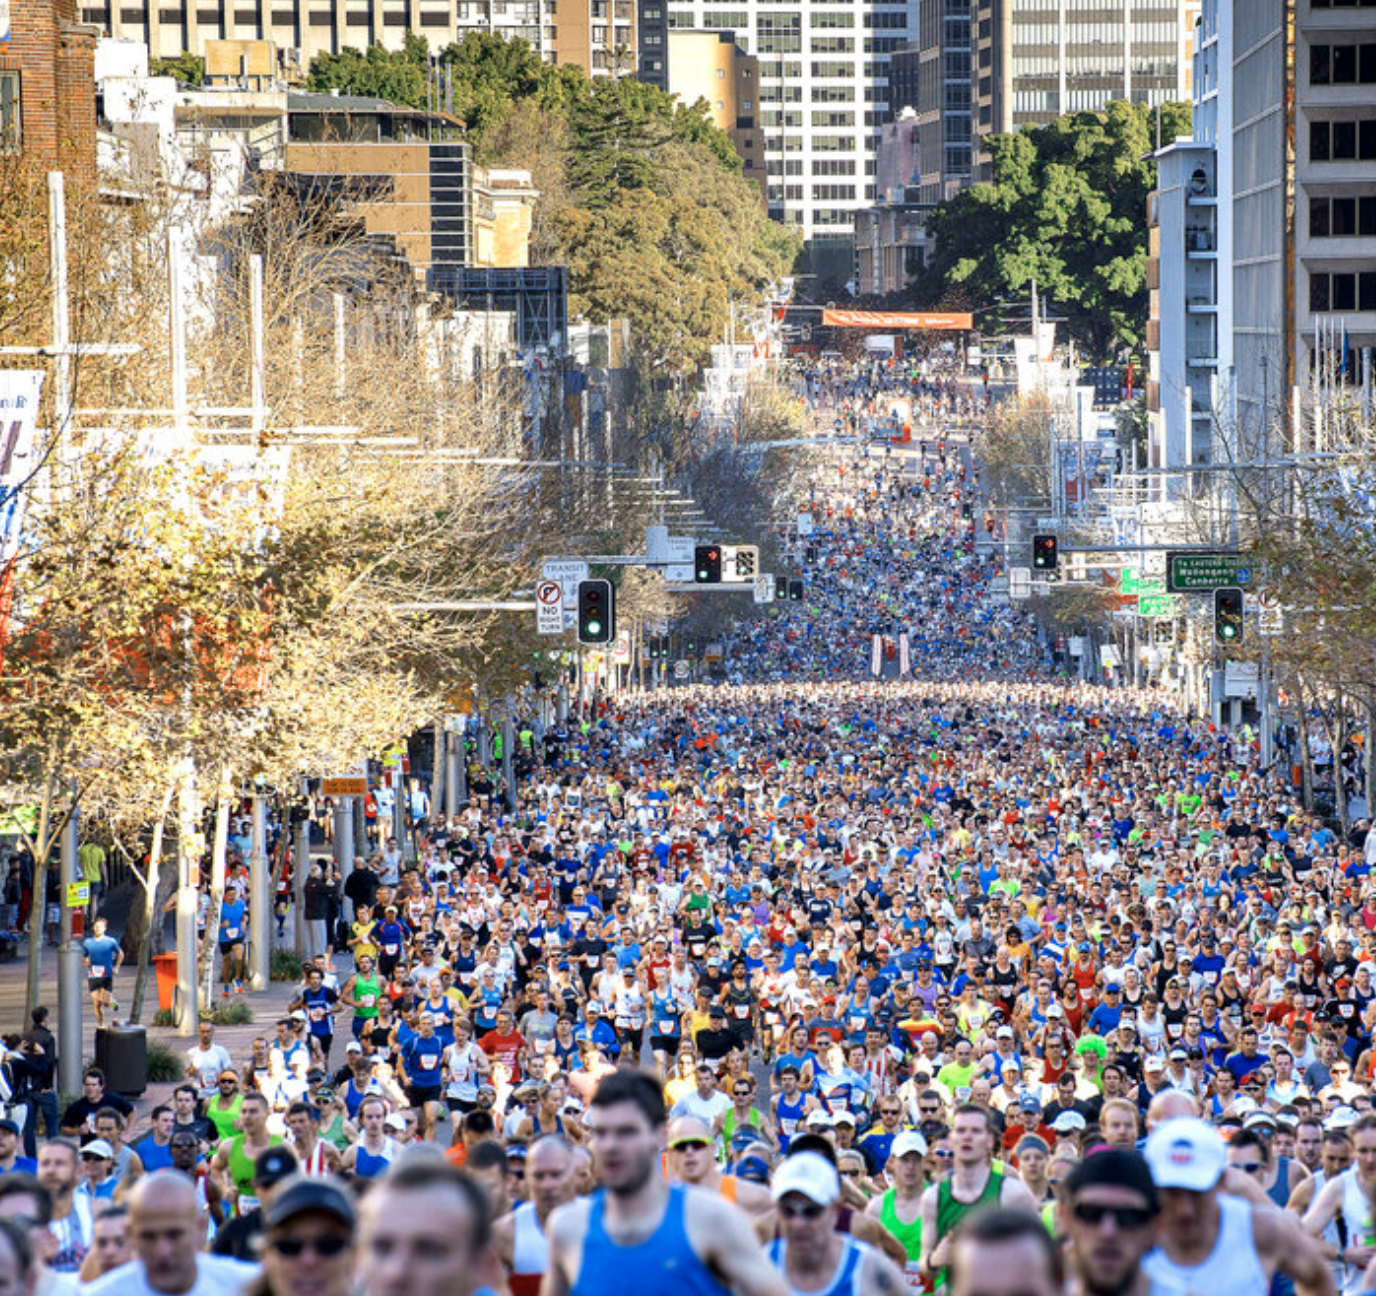 Woman Caught Cheating At City 2 Surf Gets Banned For Life